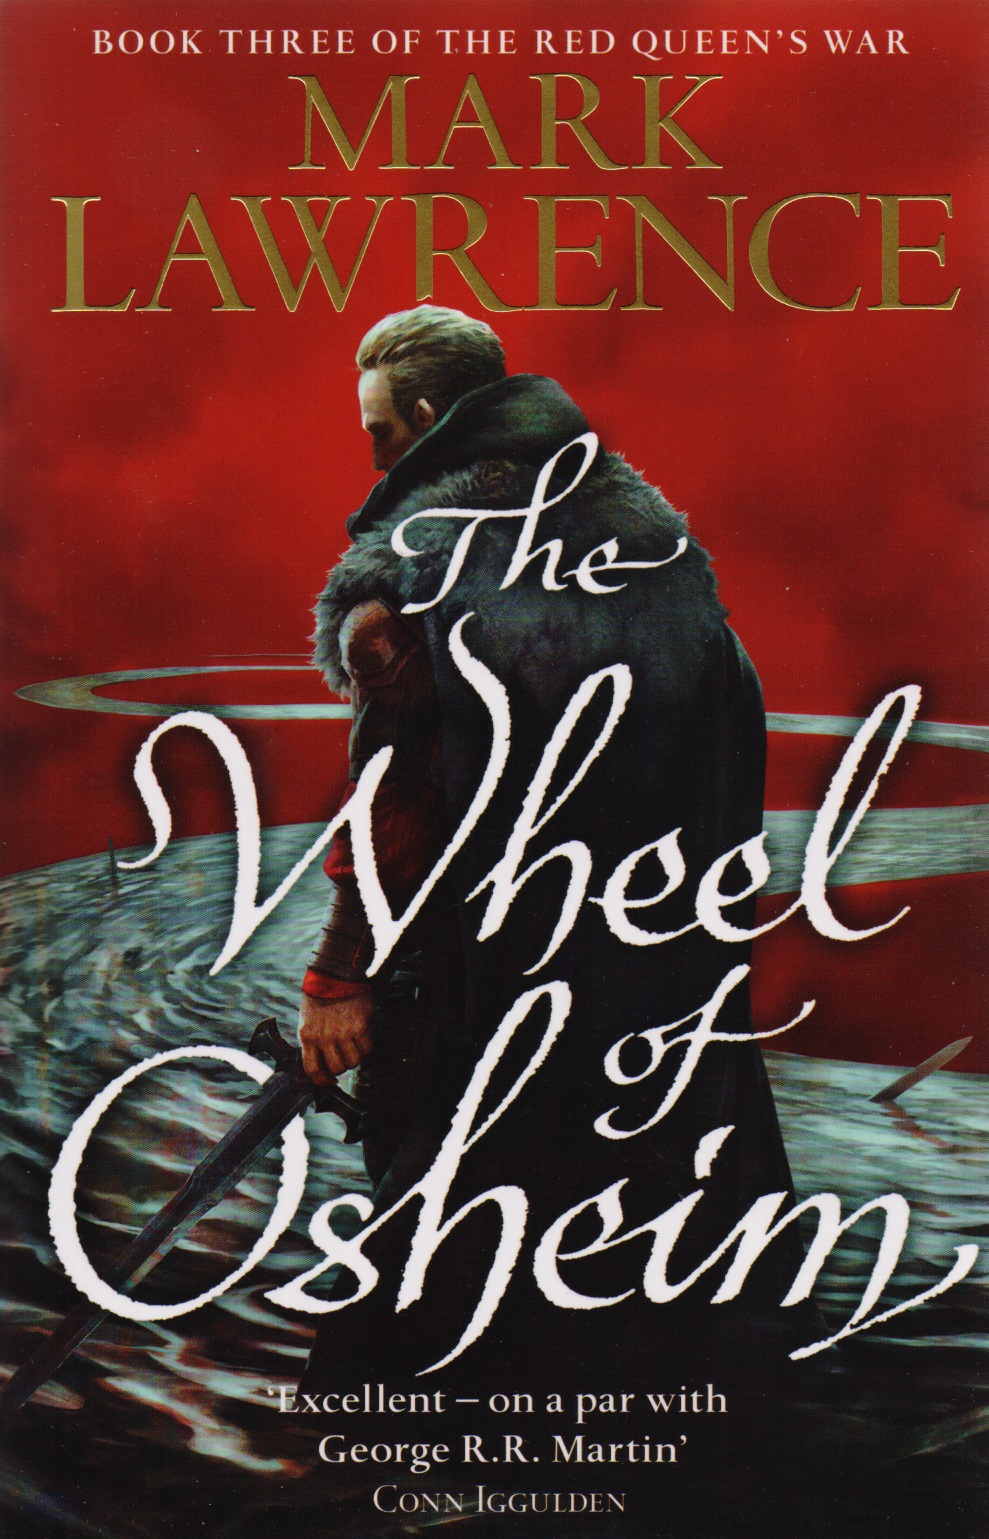 lawrence mark the wheel of osheim Лоуренс Марк The Wheel of Osheim: Book Three of The Red Queen's War